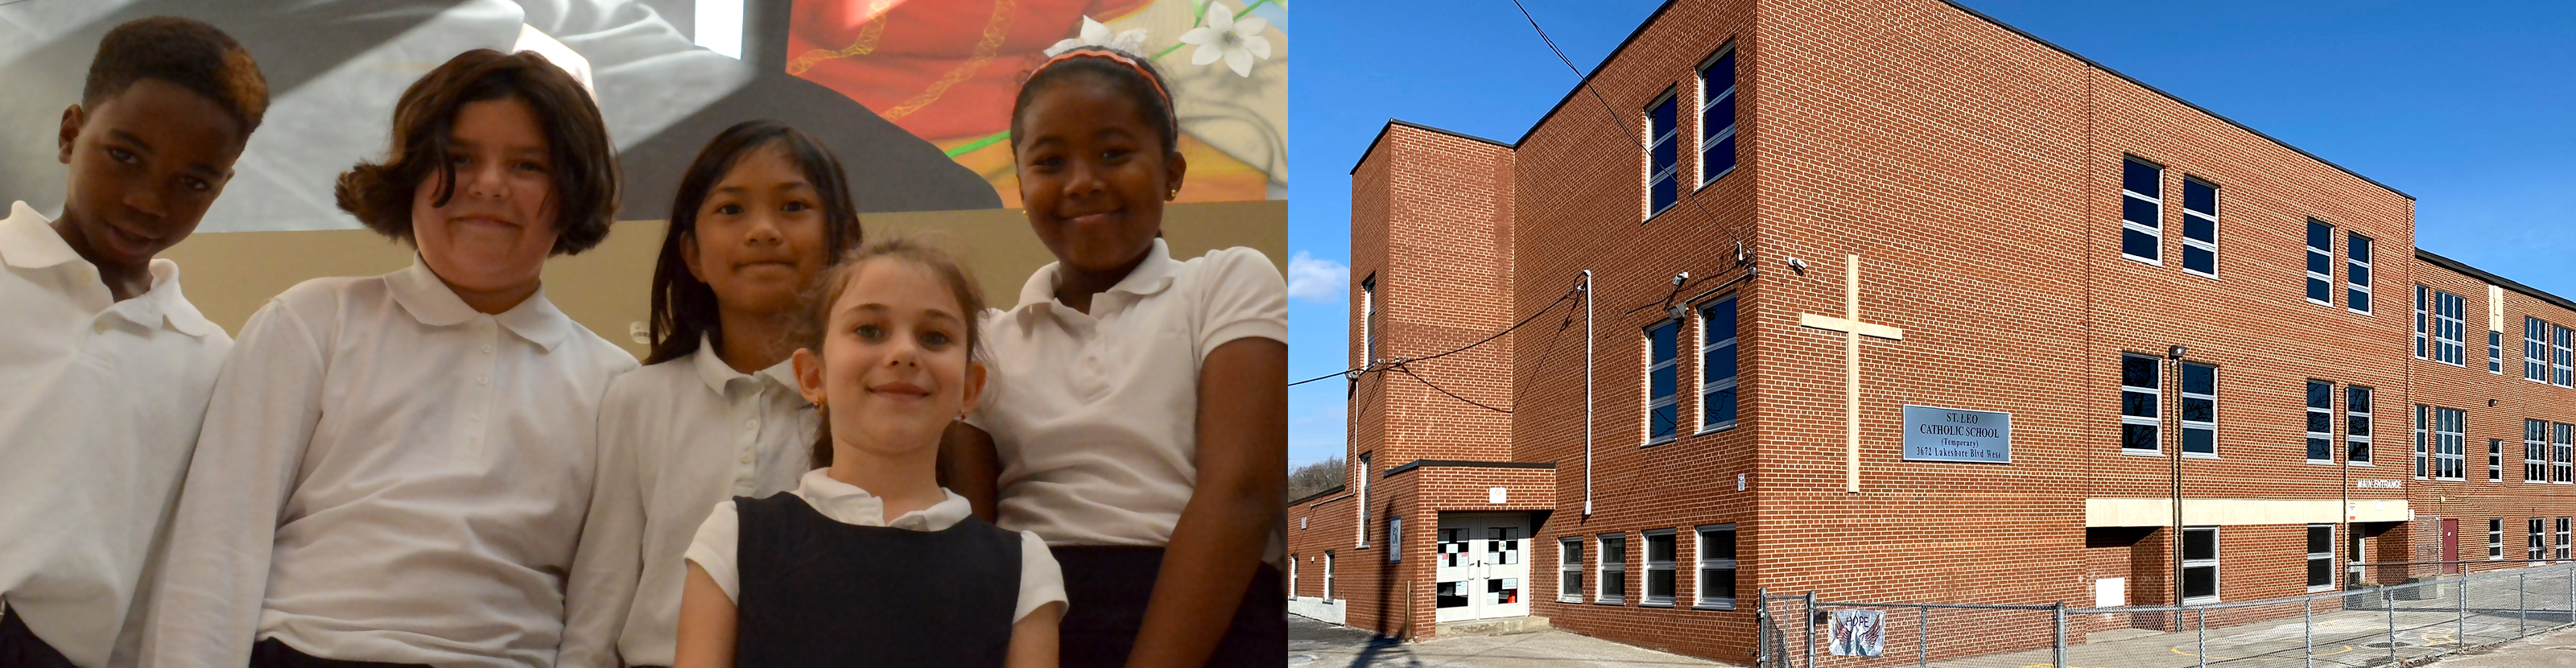 Left, a group of elementary students in white and navy school uniform. Right, the front of the St. Leo Catholic School building.